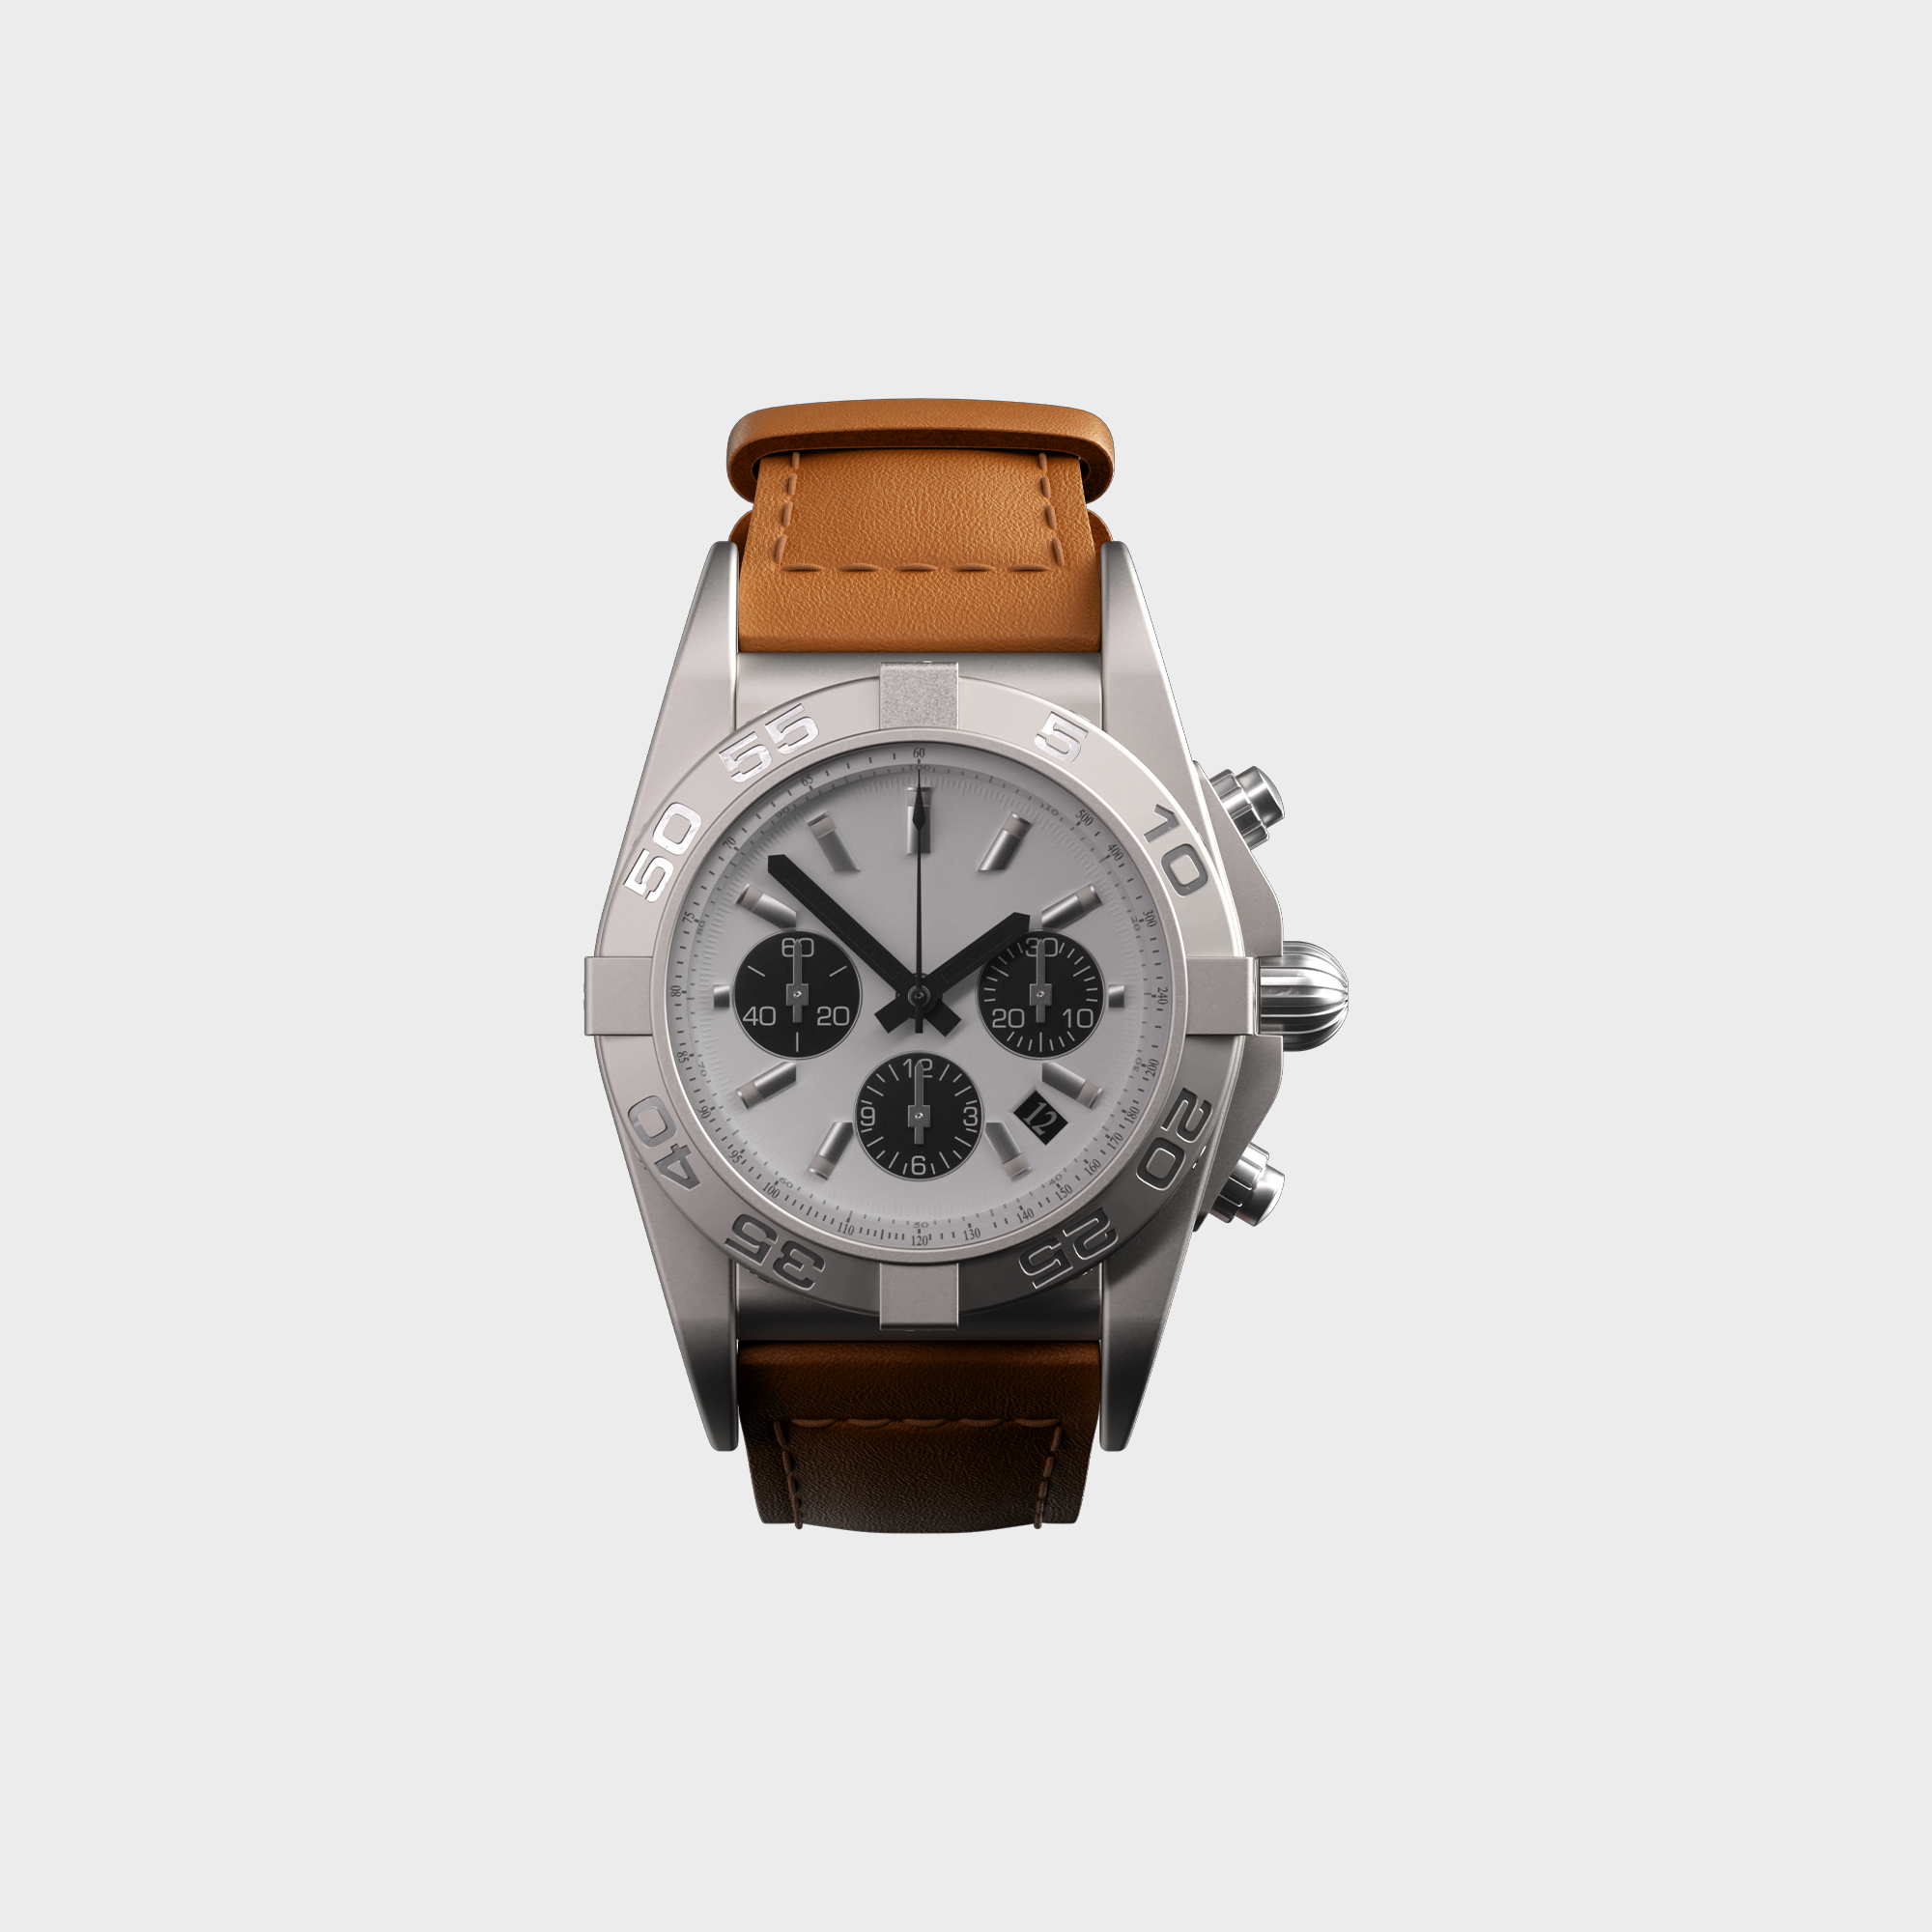 Luxury stainless steel chronograph watch with brown leather strap isolated on white background.